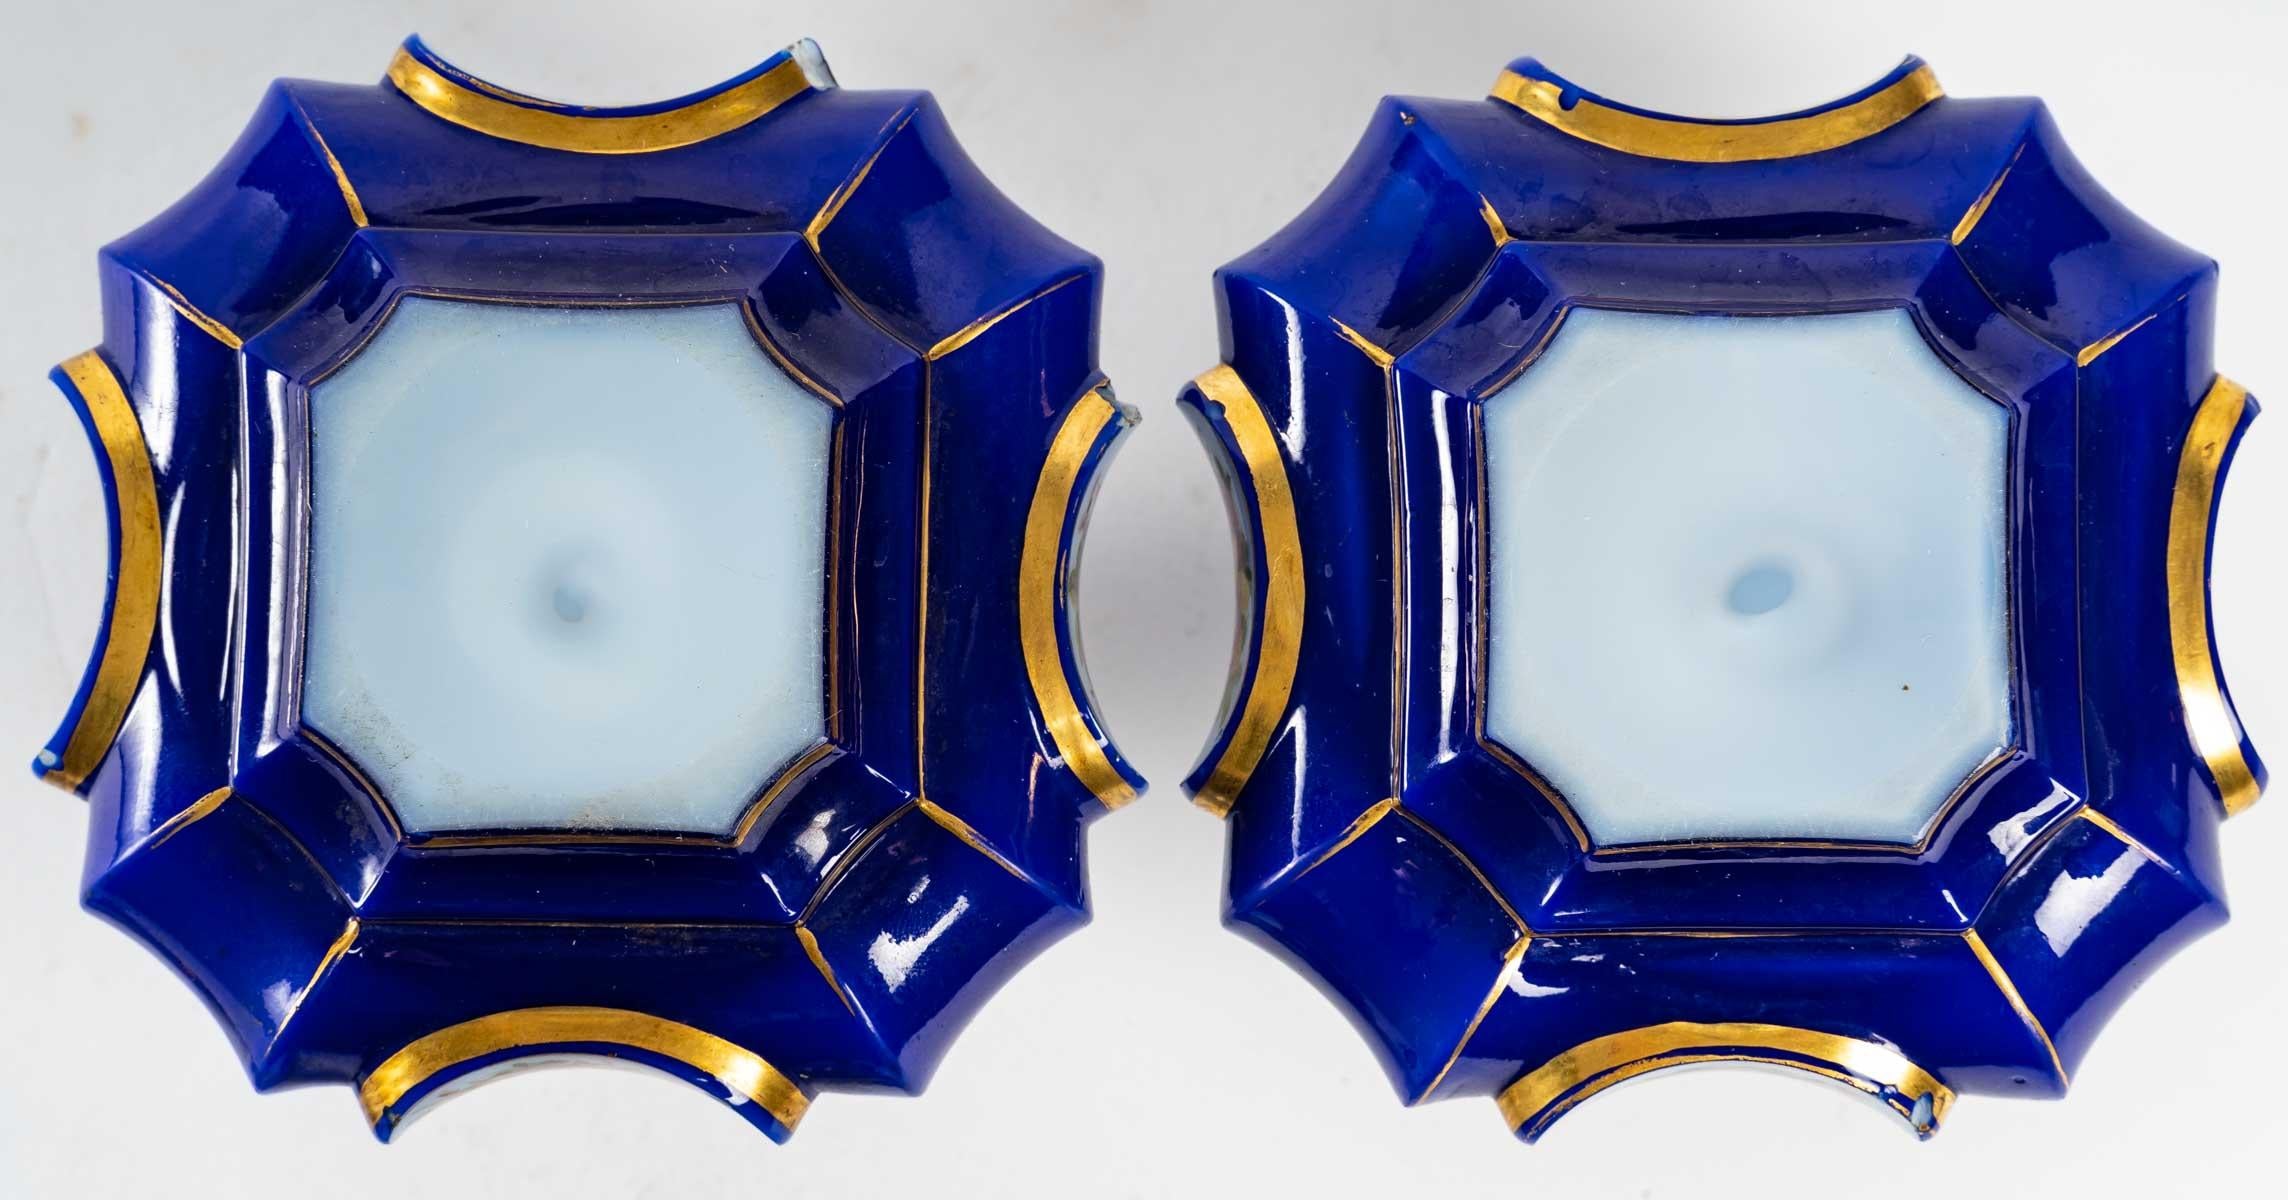 A pair of flasks in opalin blue and white, midle 19th century, gold enamelled.
Measures: H: 11 cm, W: 10 cm, D: 10 cm.